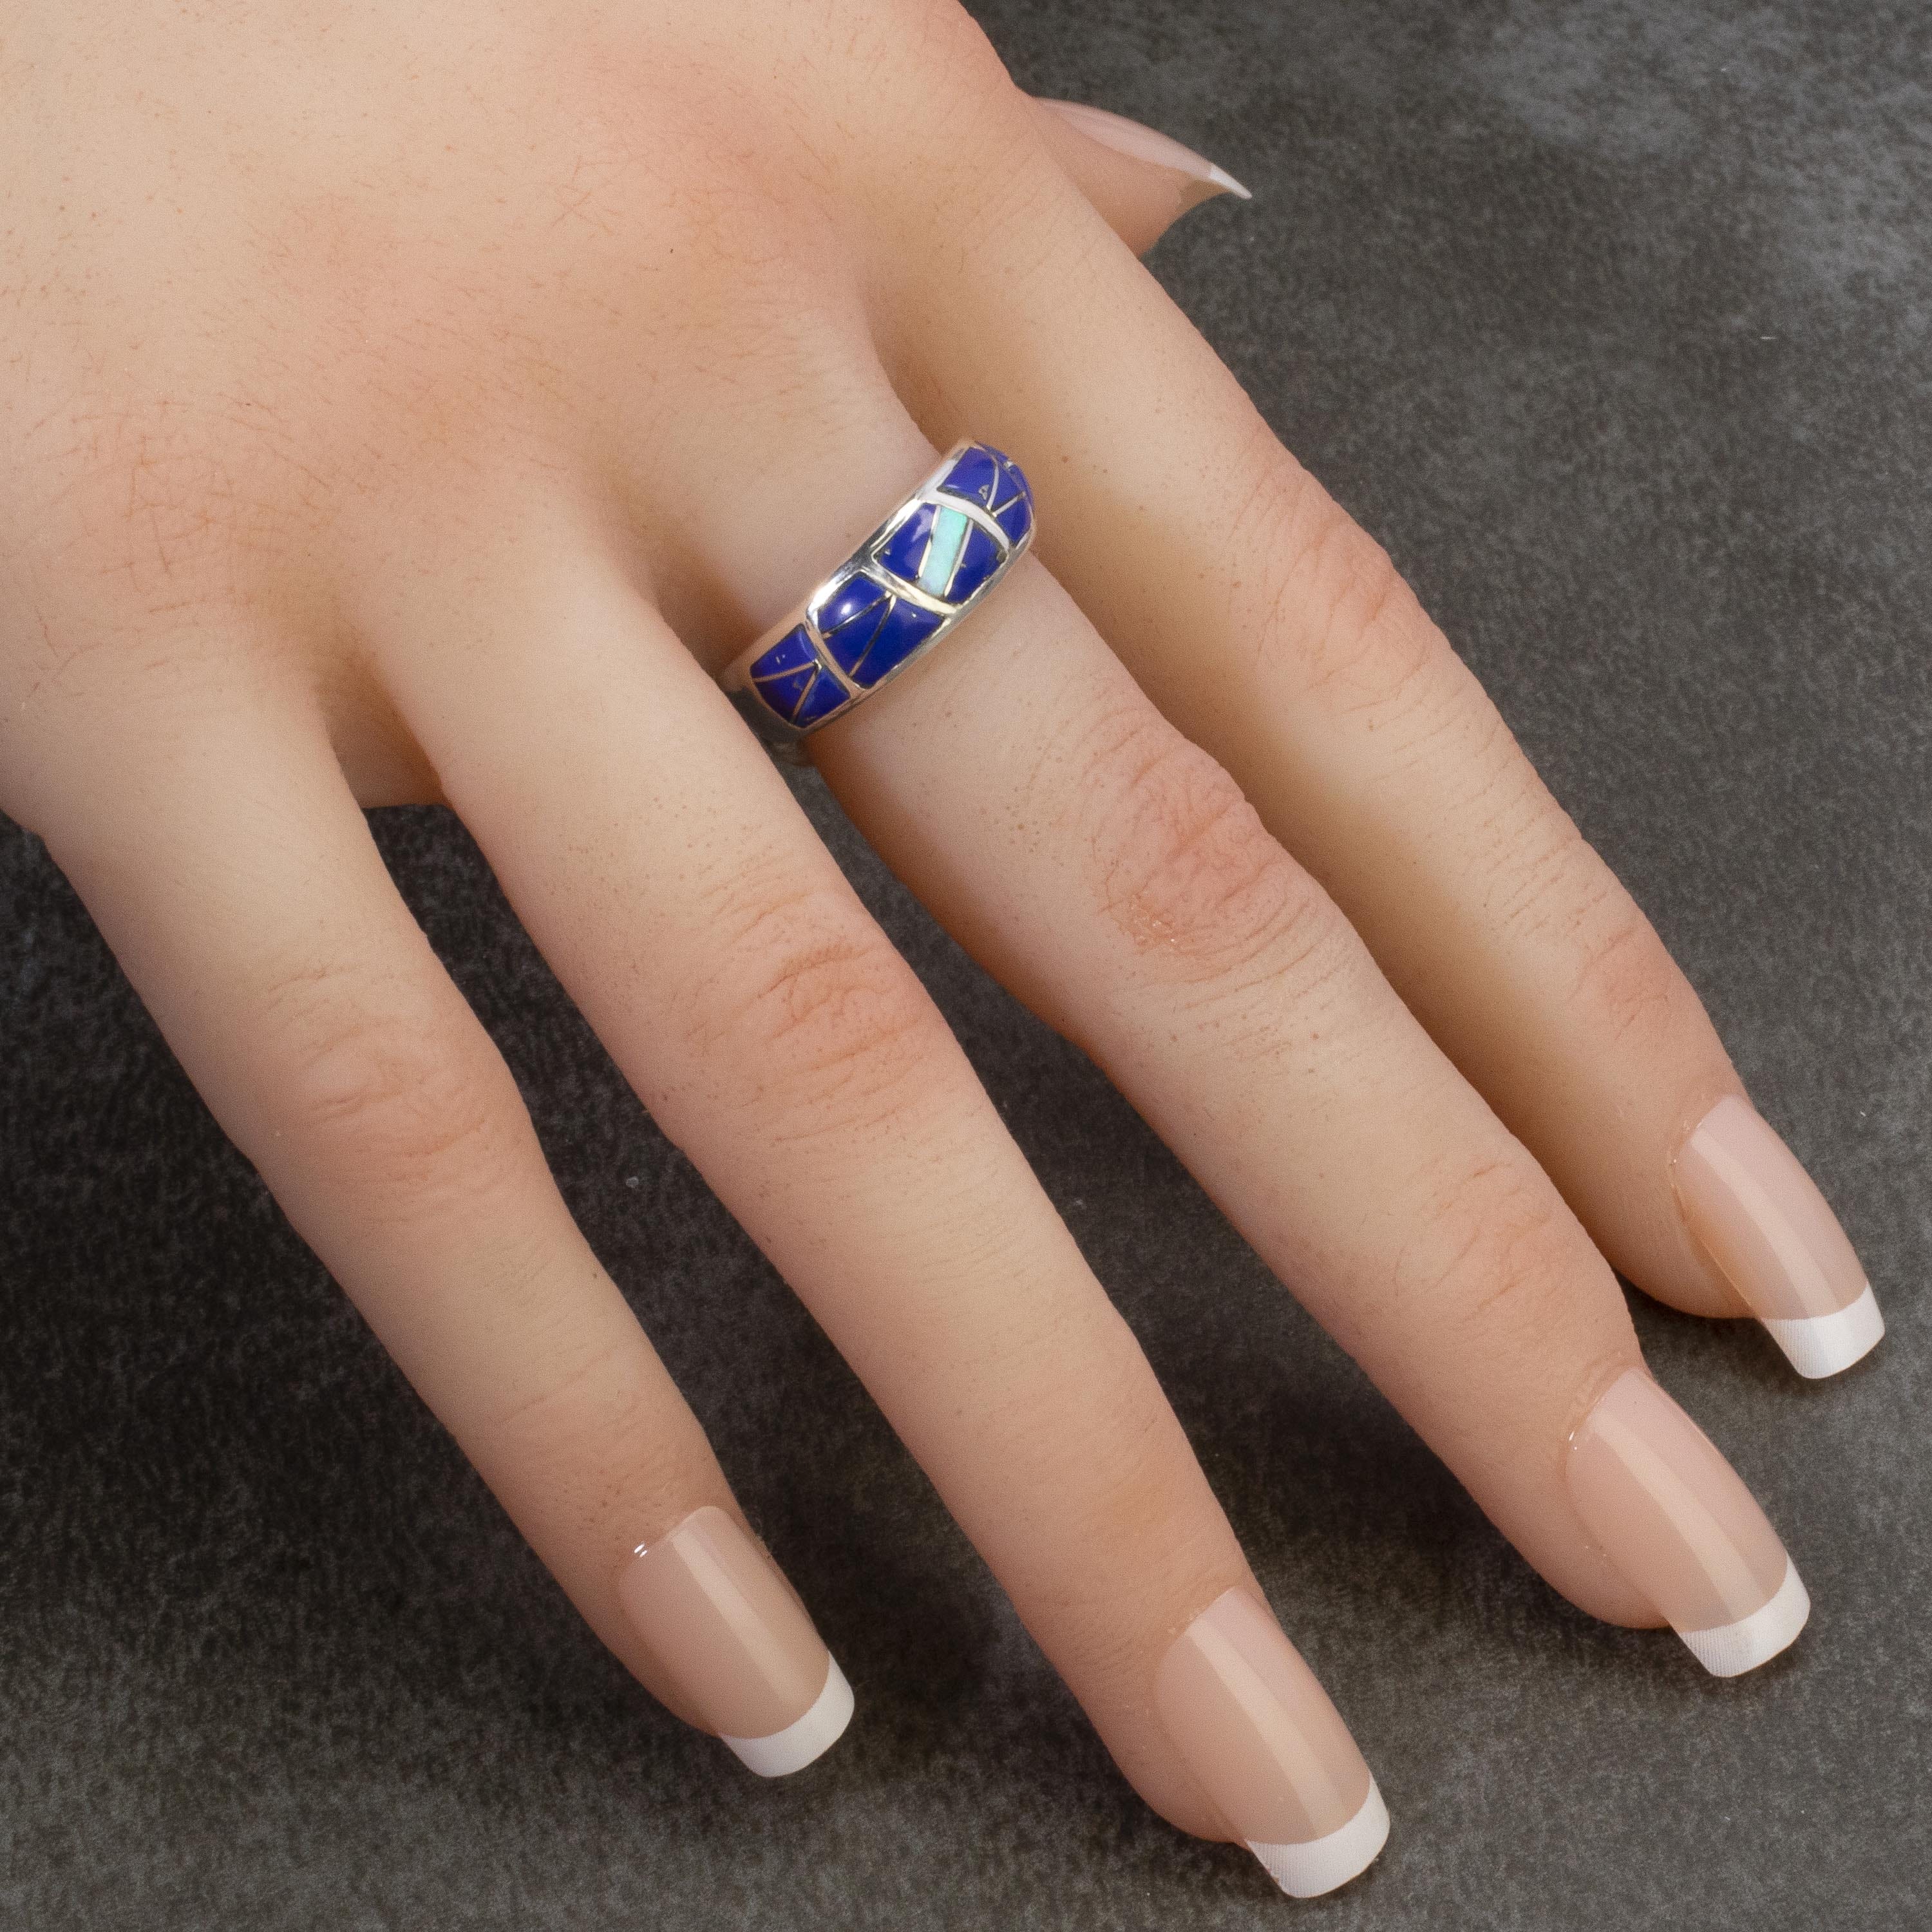 Kalifano Southwest Silver Jewelry Lapis 925 Sterling Silver Ring Handmade with Laboratory Opal Accent